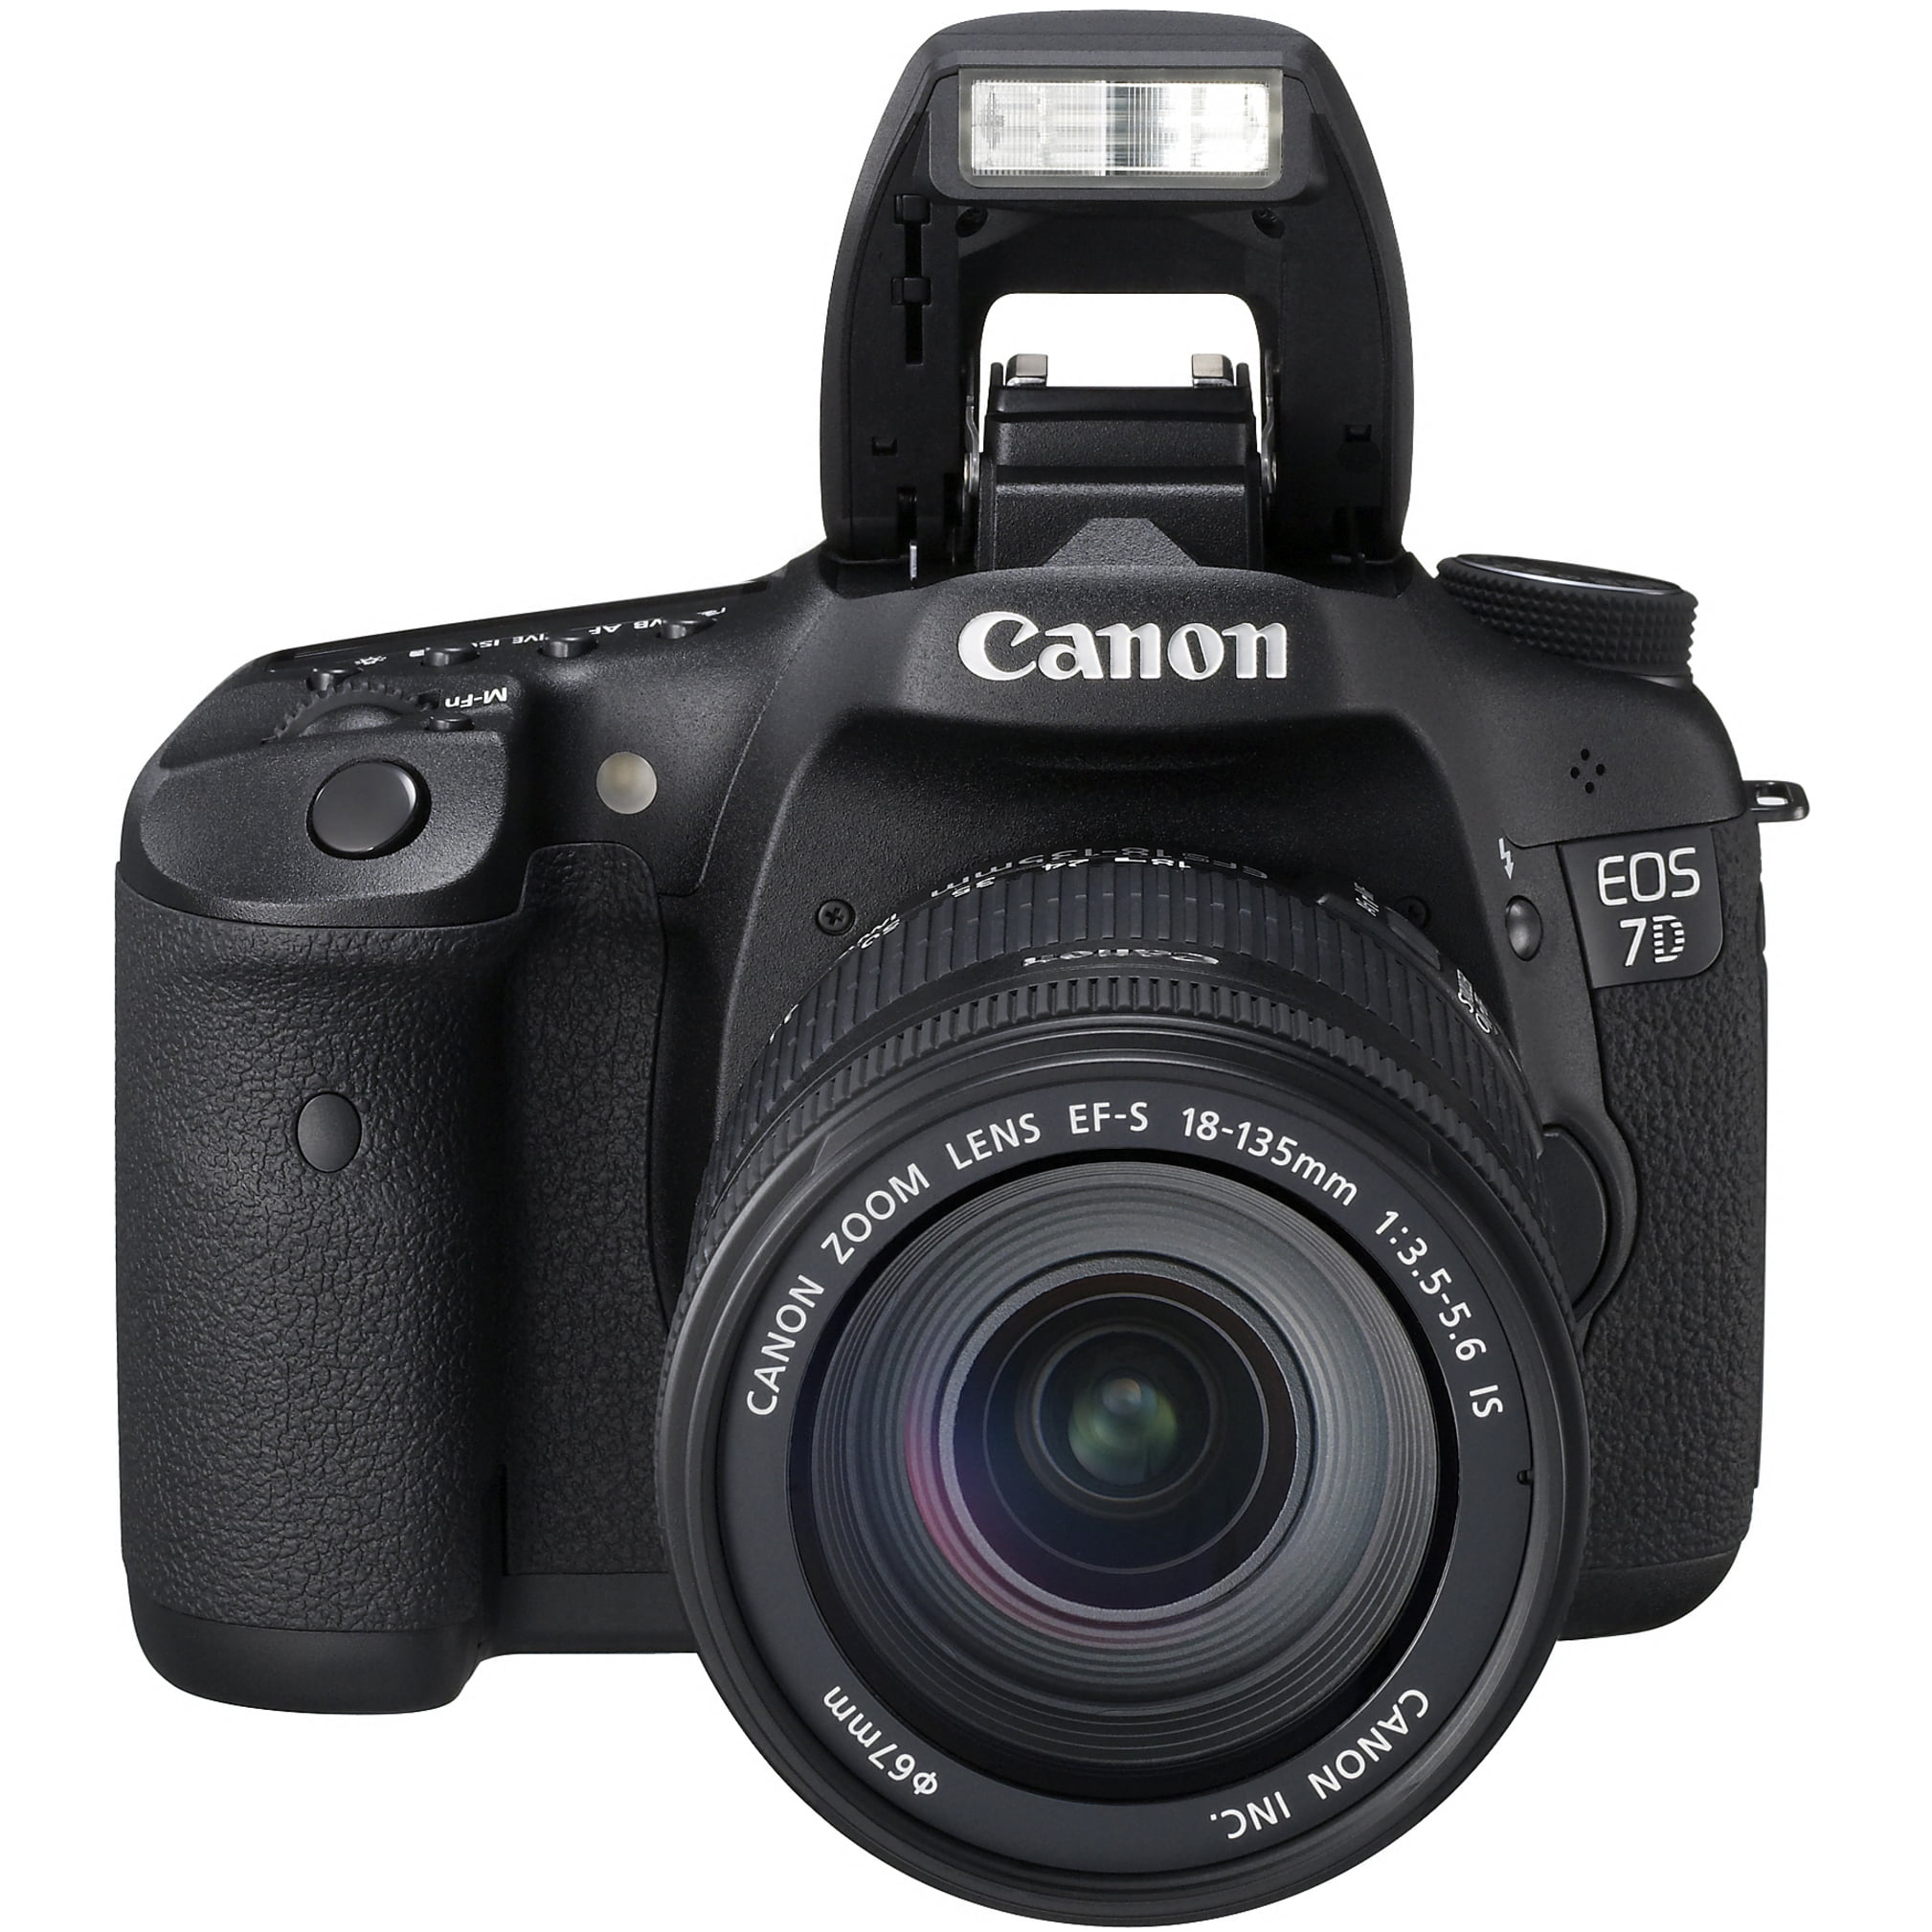 soort Product heilige Canon EOS 7D 18 MP CMOS Digital SLR Camera with 28-135mm f/3.5-5.6 IS USM  Lens (discontinued by manufacturer) - Walmart.com